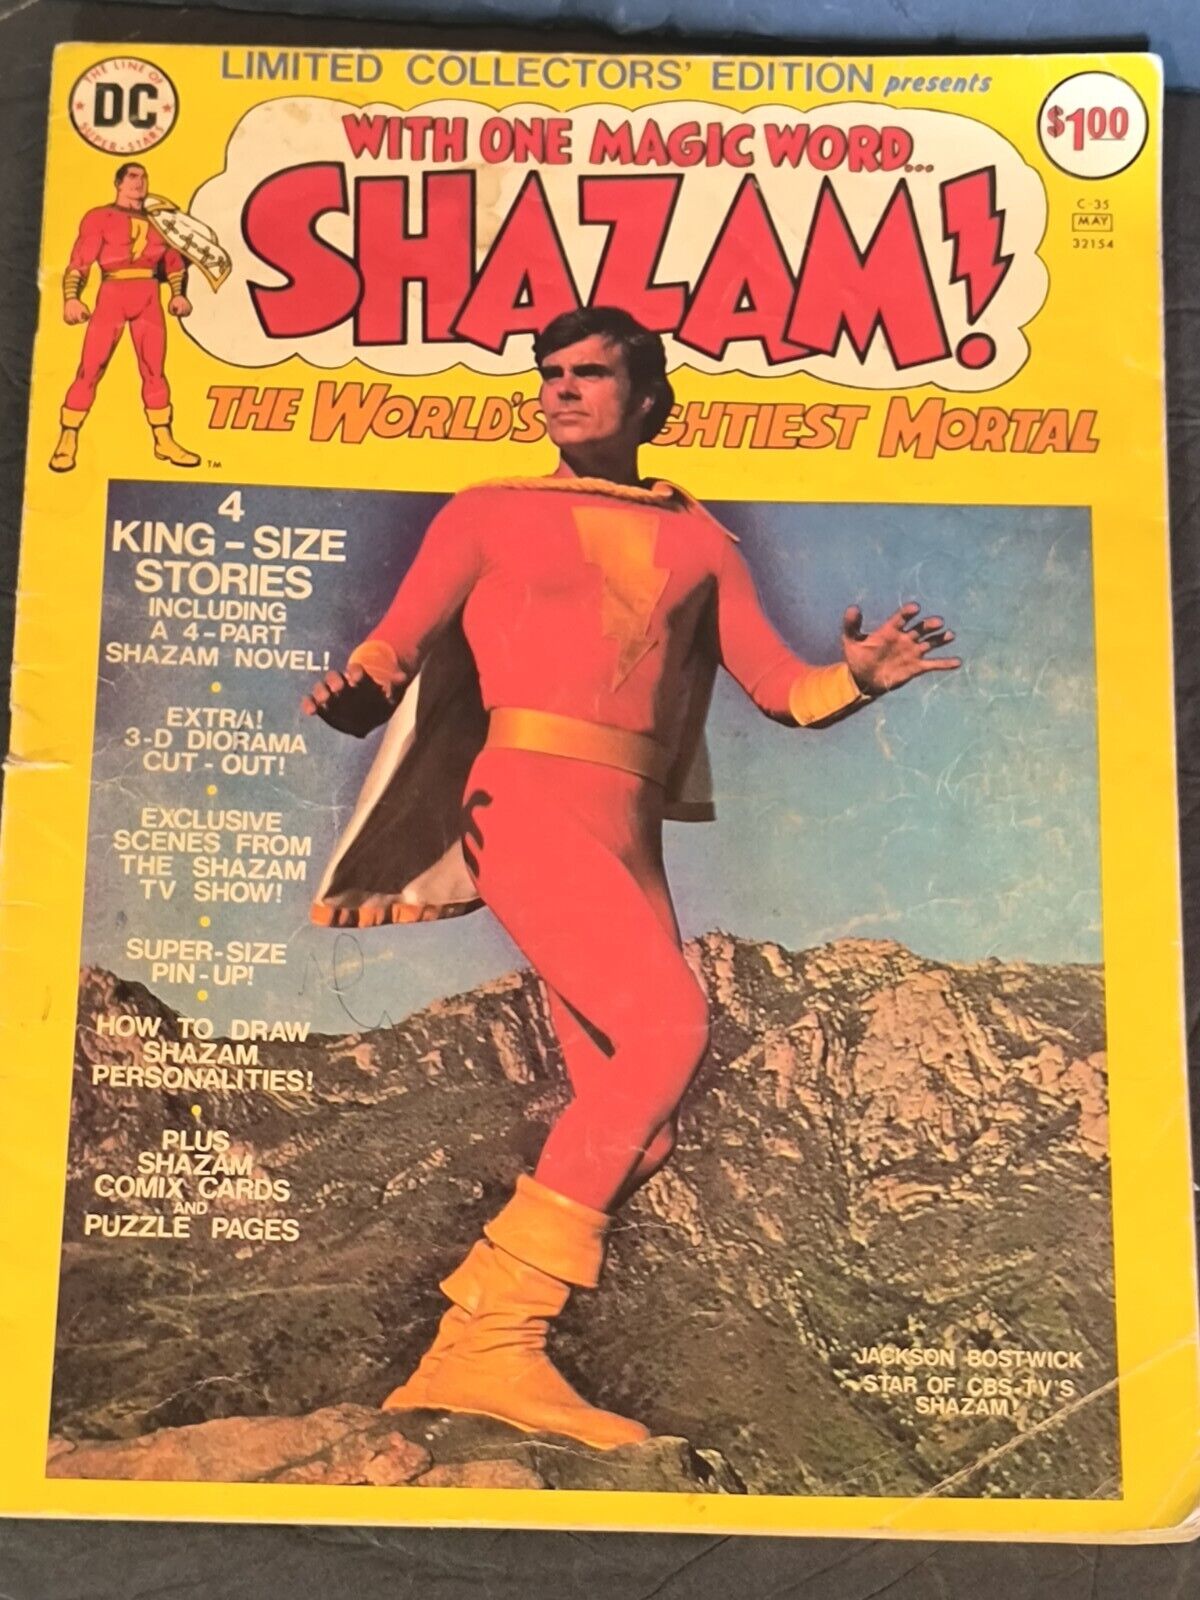 DC LIMITED COLLECTORS' EDITION: WITH ONE MAGIC WORD...SHAZAM, C-35, 1976, VG+